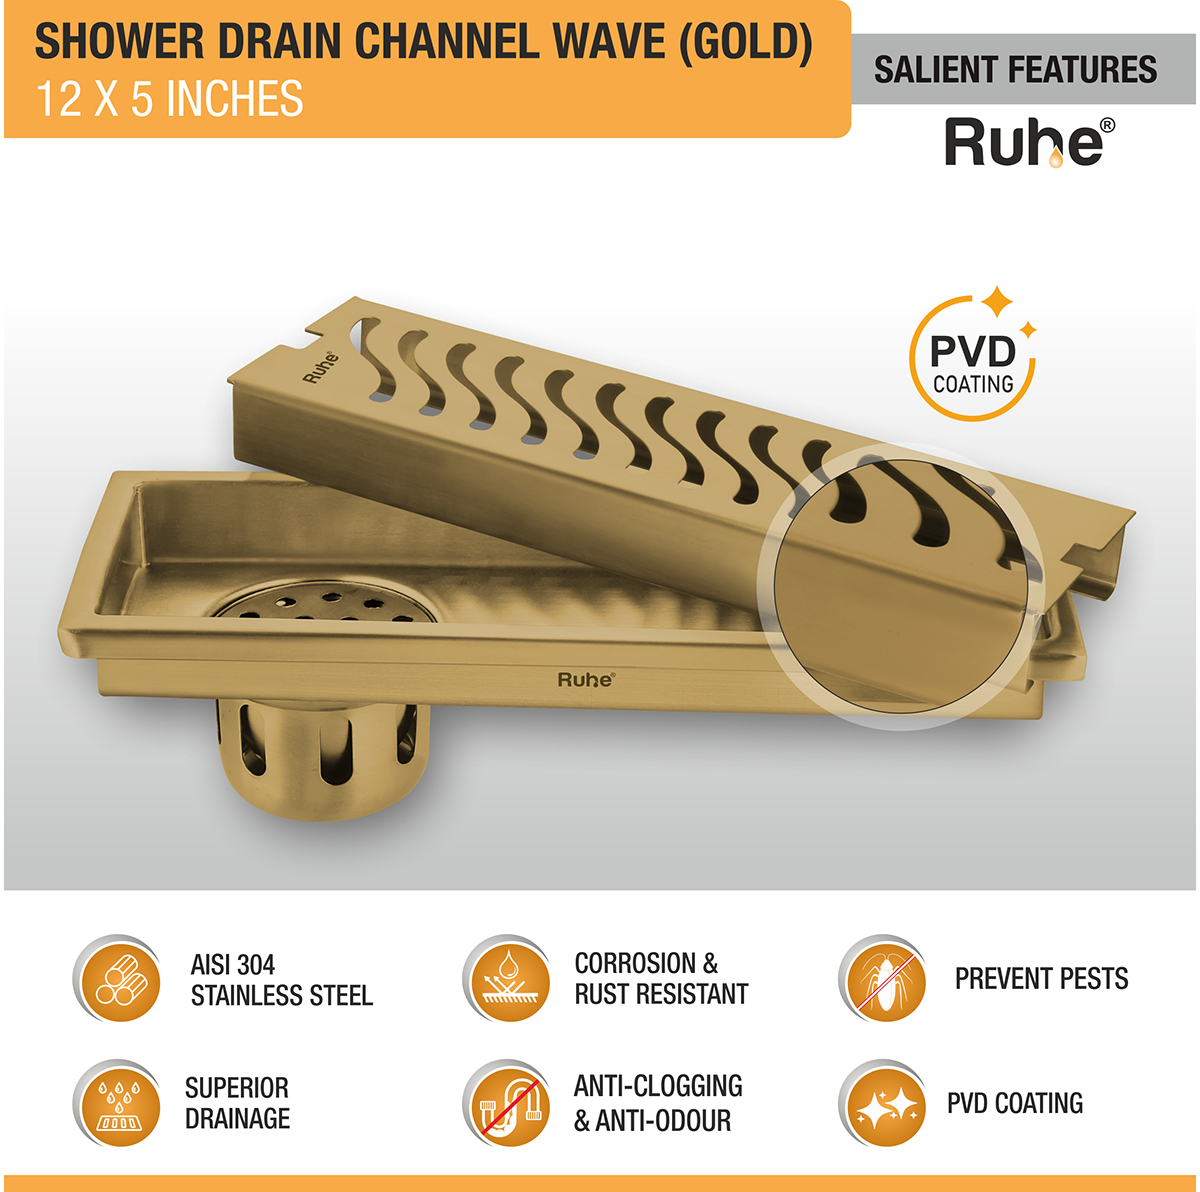 Wave Shower Drain Channel (12 x 5 Inches) YELLOW GOLD features